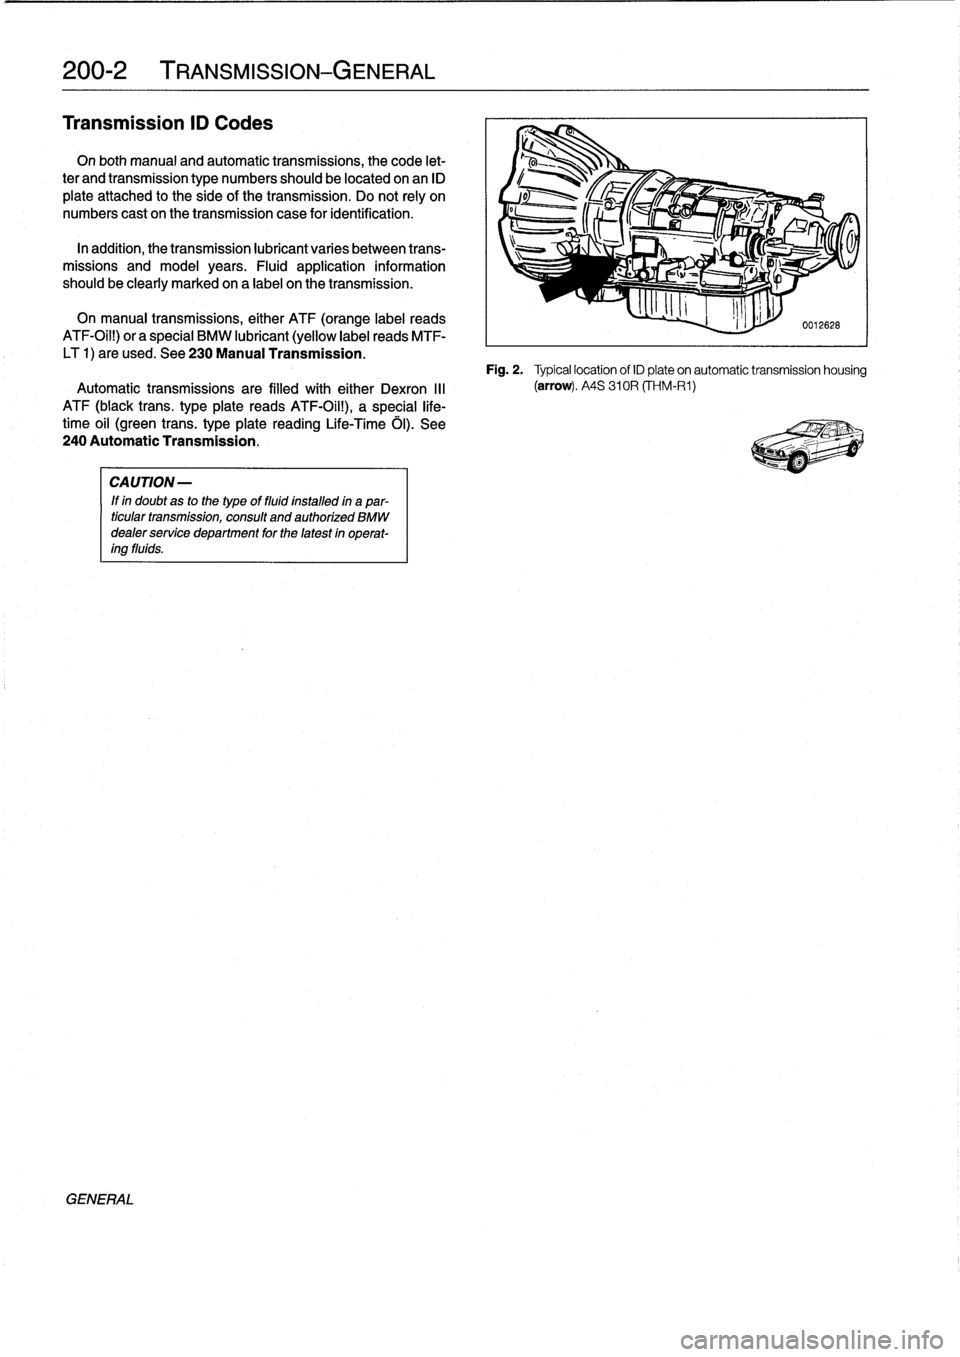 BMW 325i 1994 E36 Owners Manual 
200-2
TRANSMISSION-GENERAL

Transmission
ID
Codes

On
both
manual
and
automatic
transmissions,
the
code
let-

ter
and
transmission
type
numbers
should
be
located
onan
ID

plate
attached
to
the
síde
